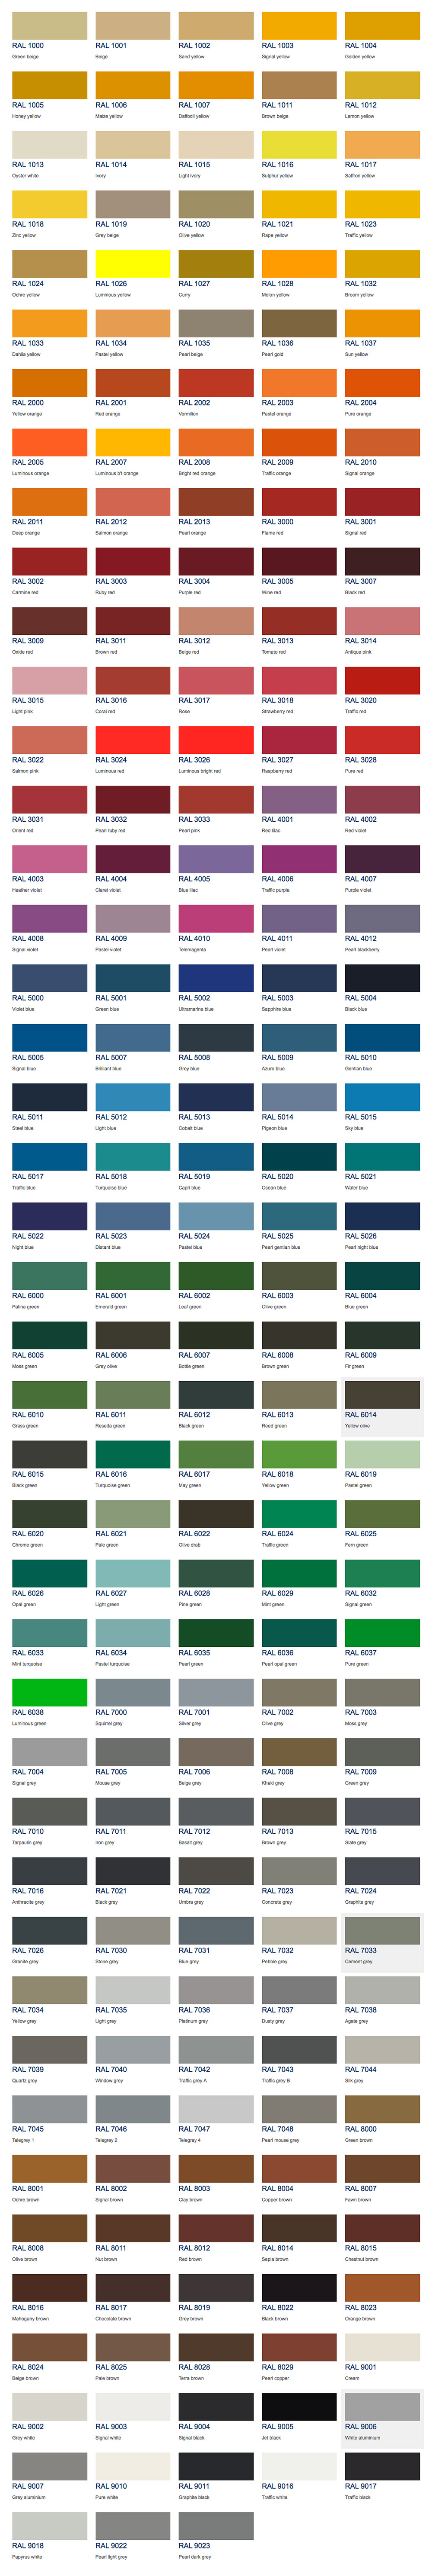 ral to pantone conversion table or chart